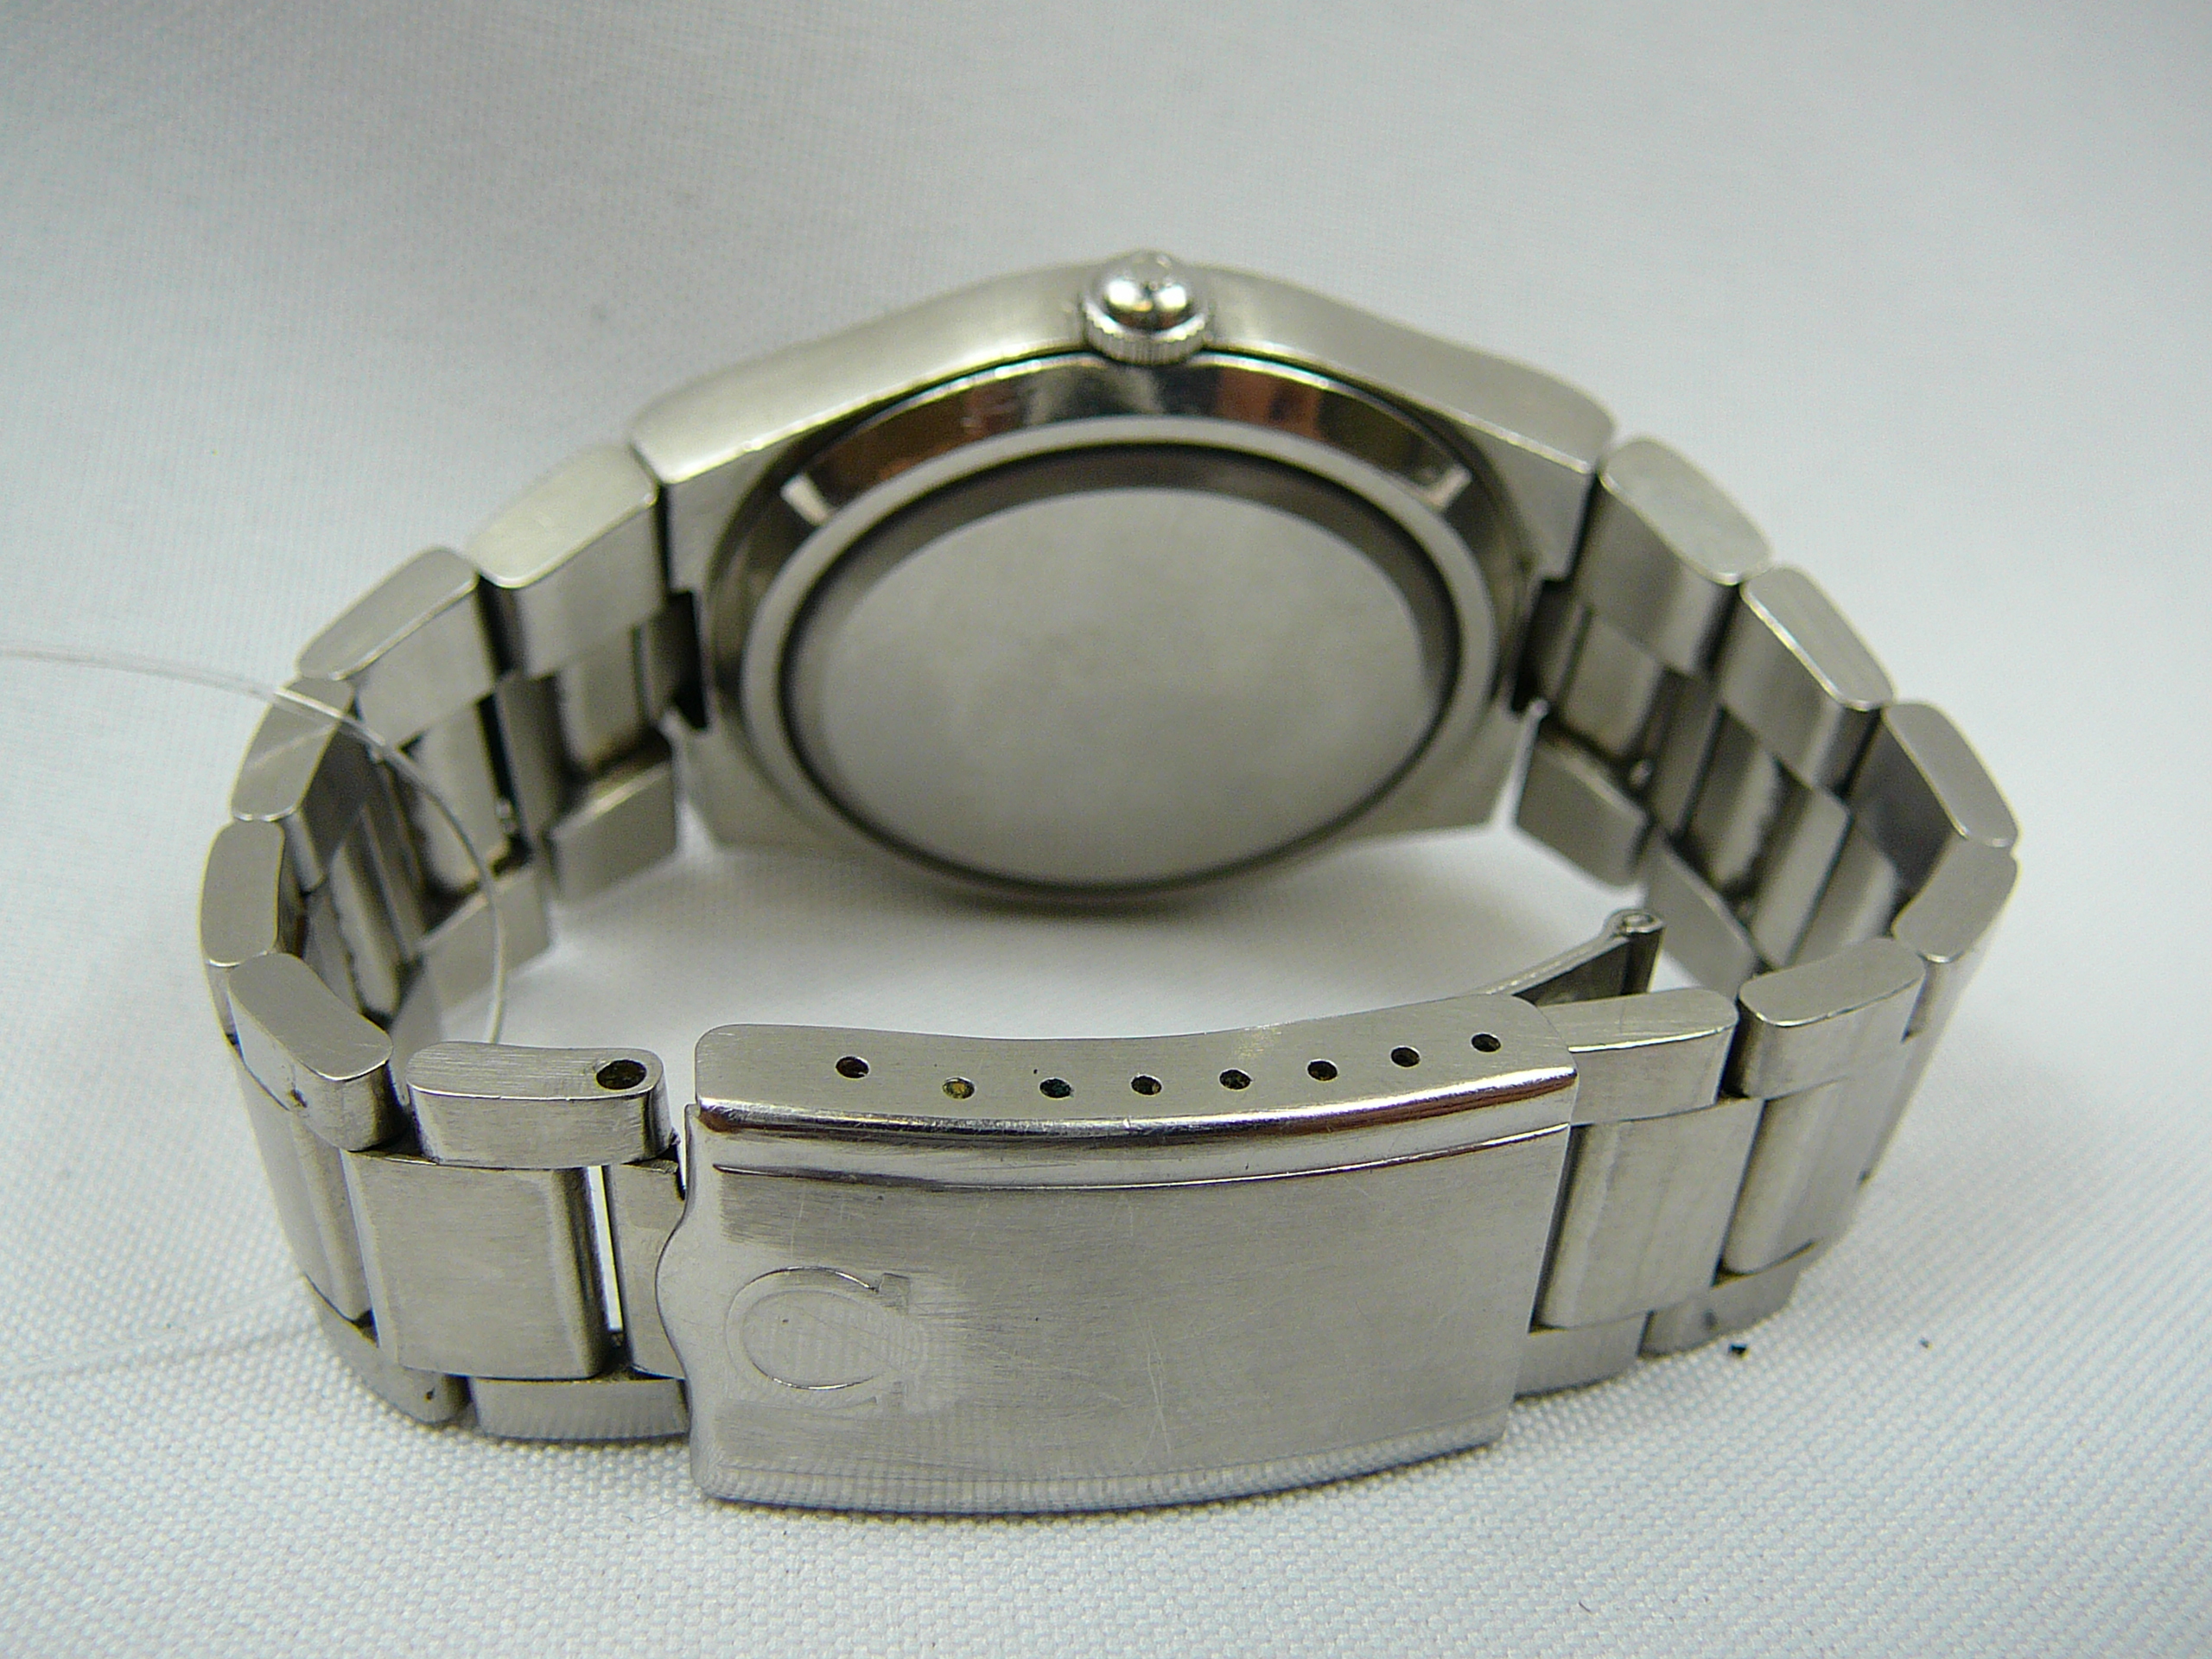 Gents Omega wrist watch - Image 3 of 3